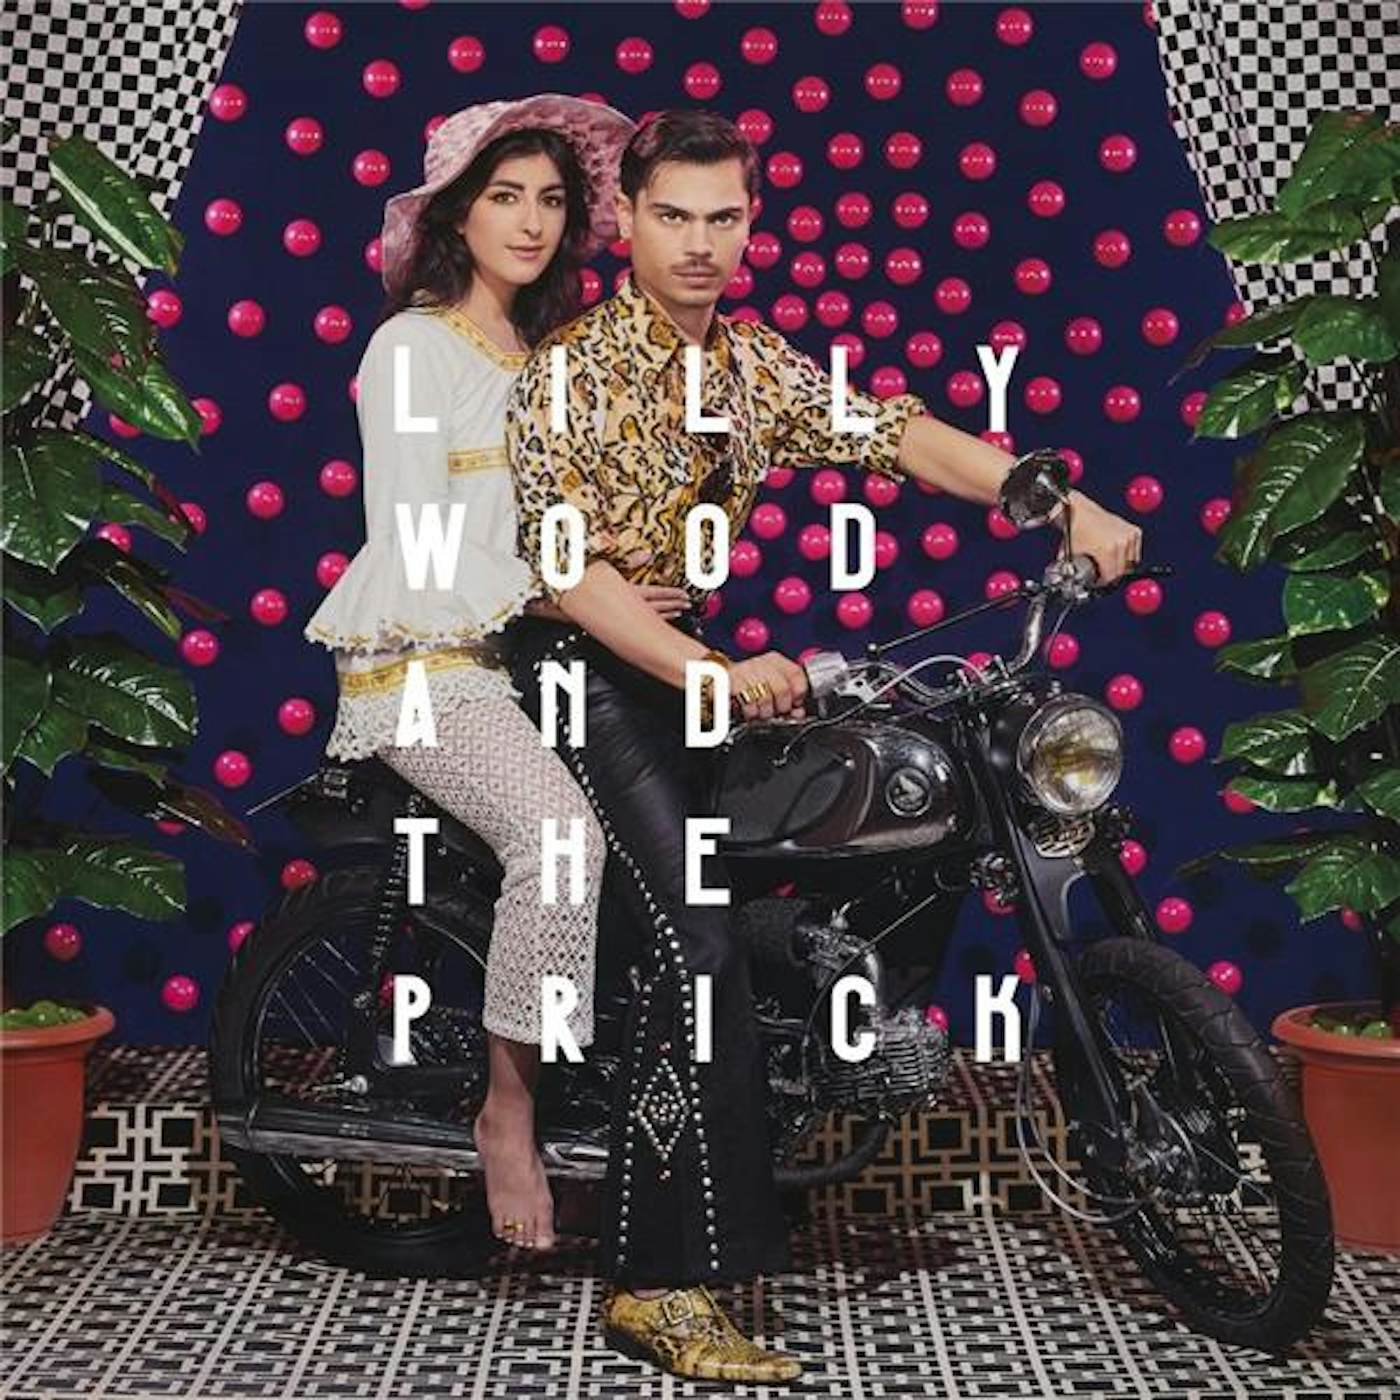 Lilly Wood And The Prick / Shadows - 2LP+CD